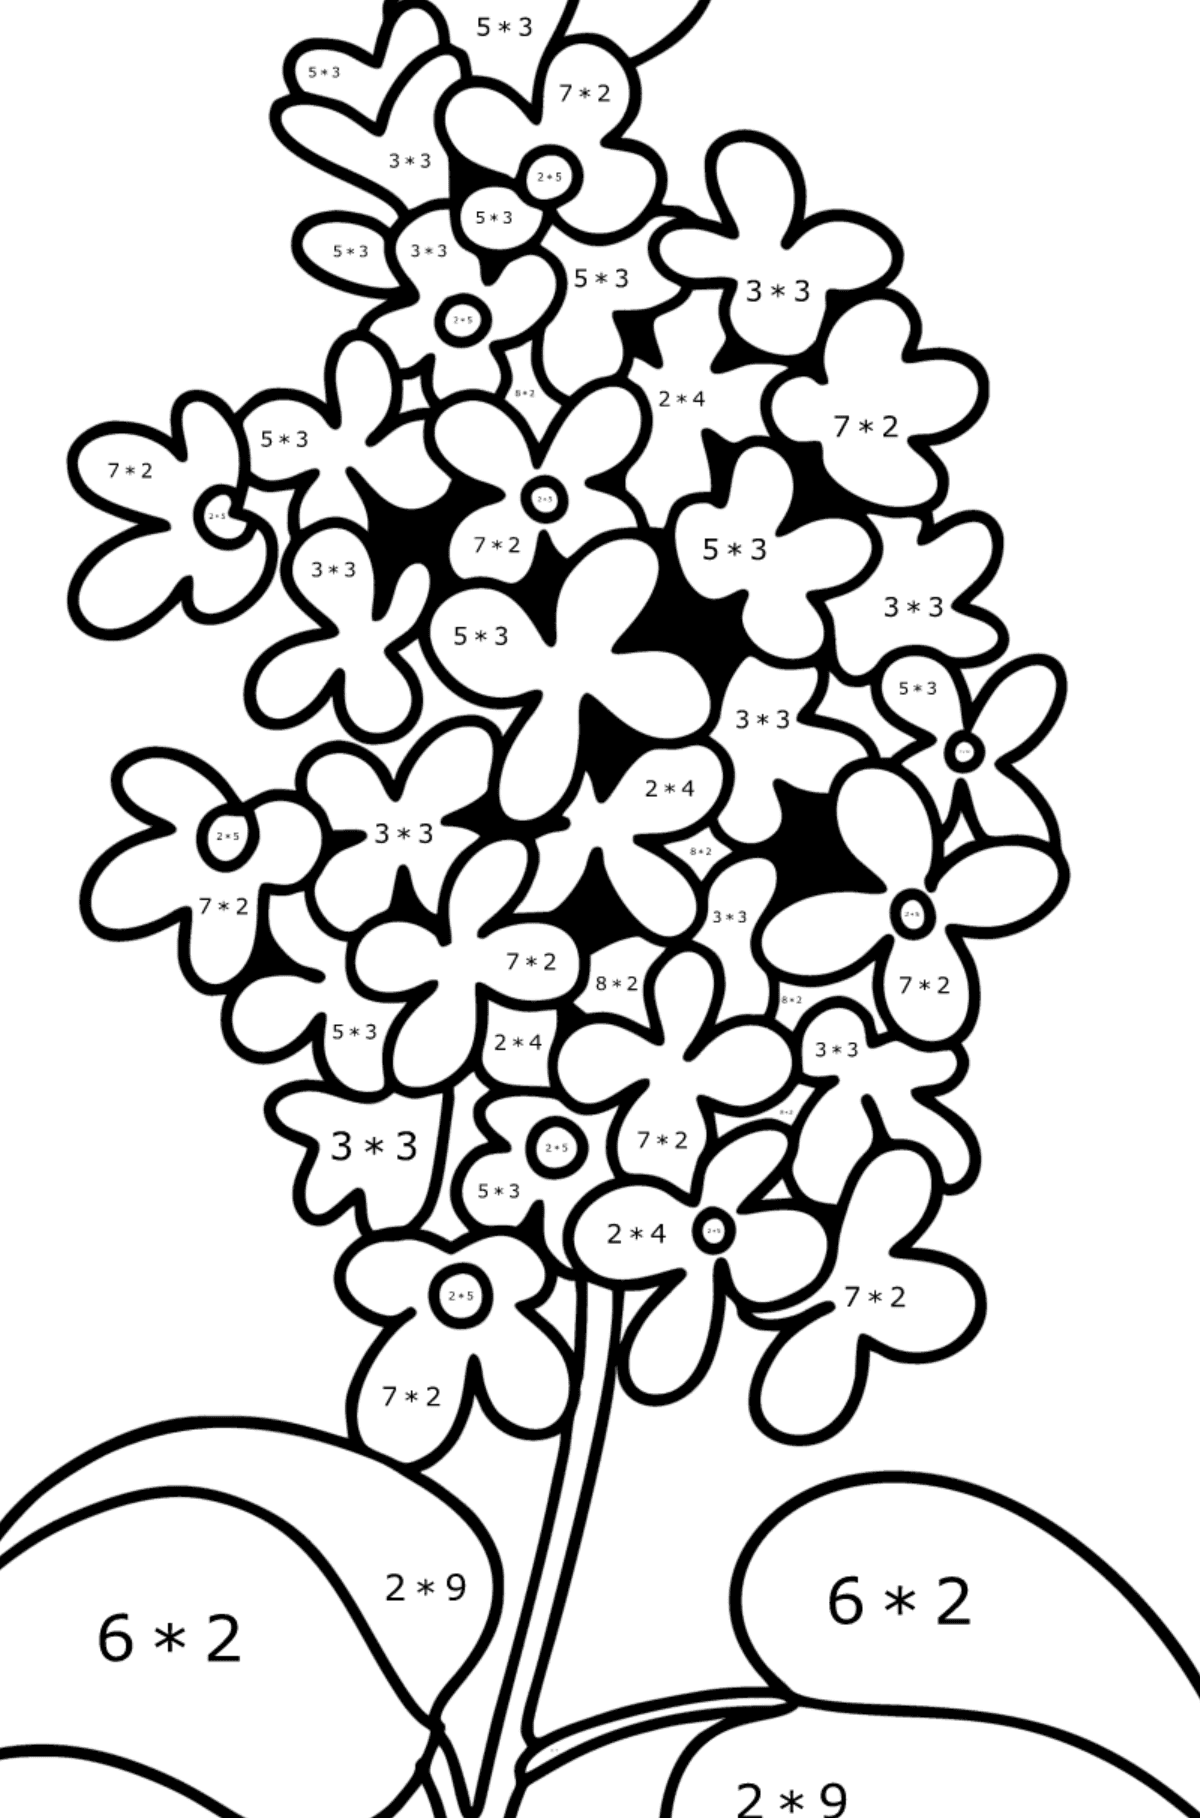 Lilac sprig coloring page - Math Coloring - Multiplication for Kids